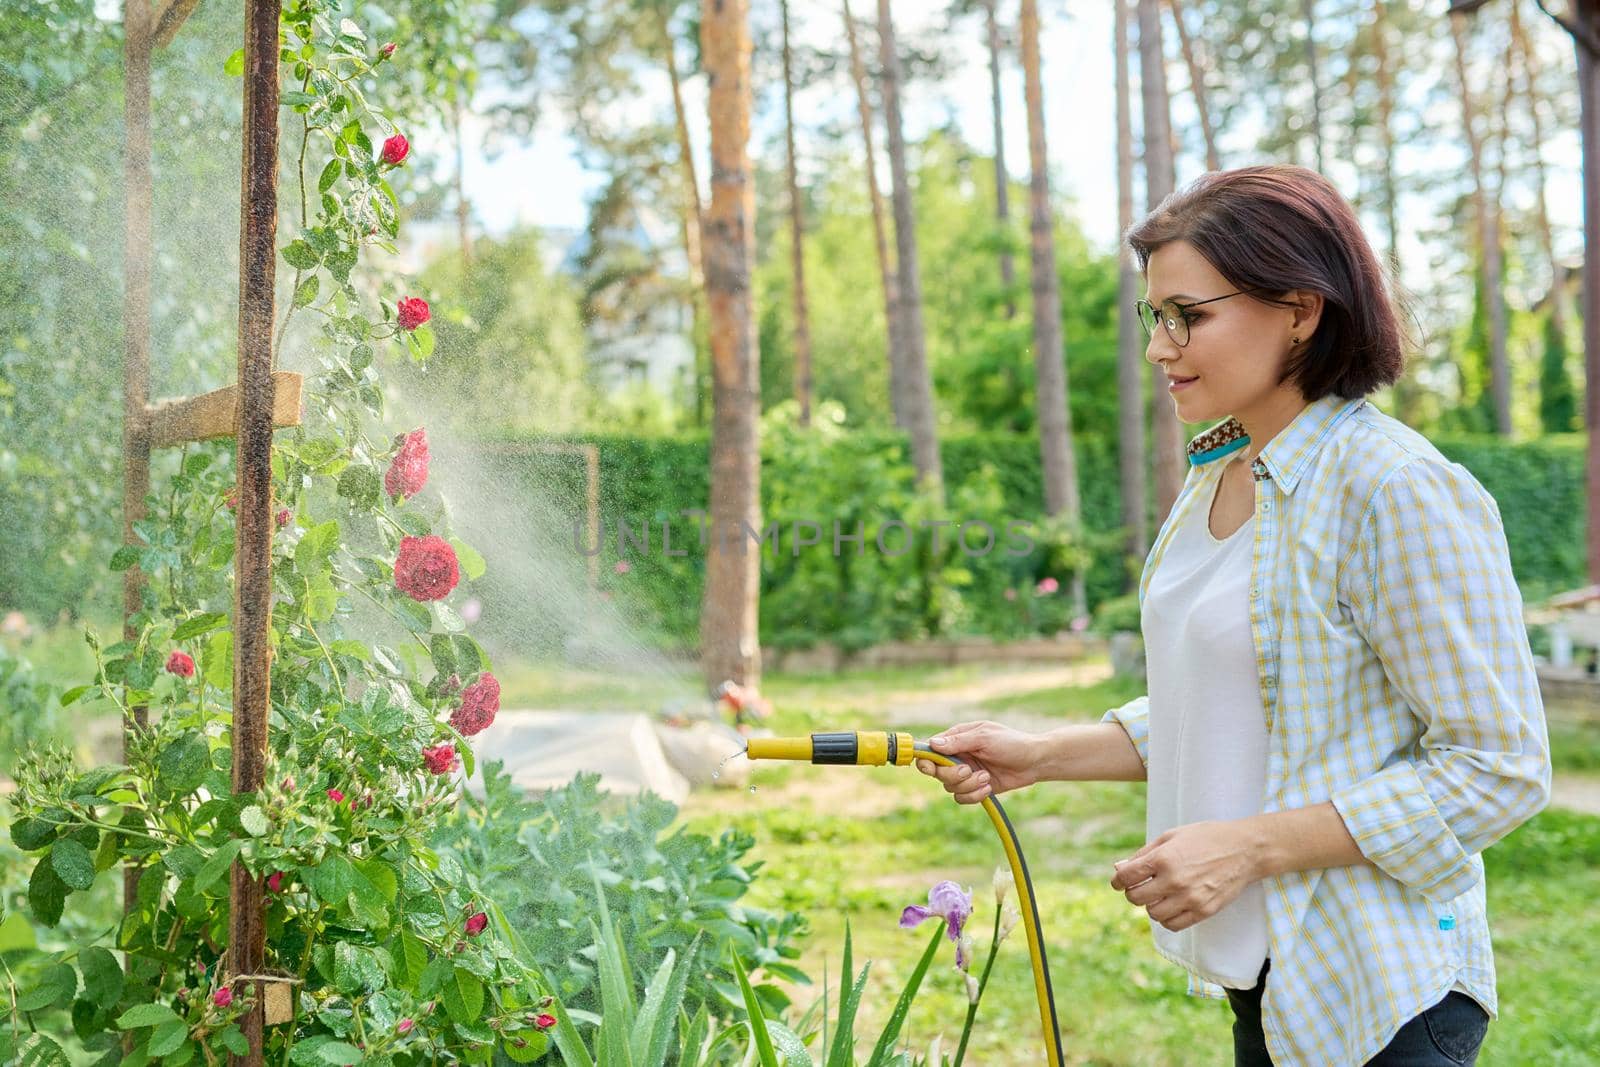 Middle-aged woman in the backyard watering the flowers of the blooming rose bushes from the garden hose. Hobbies and leisure, plant care, gardening